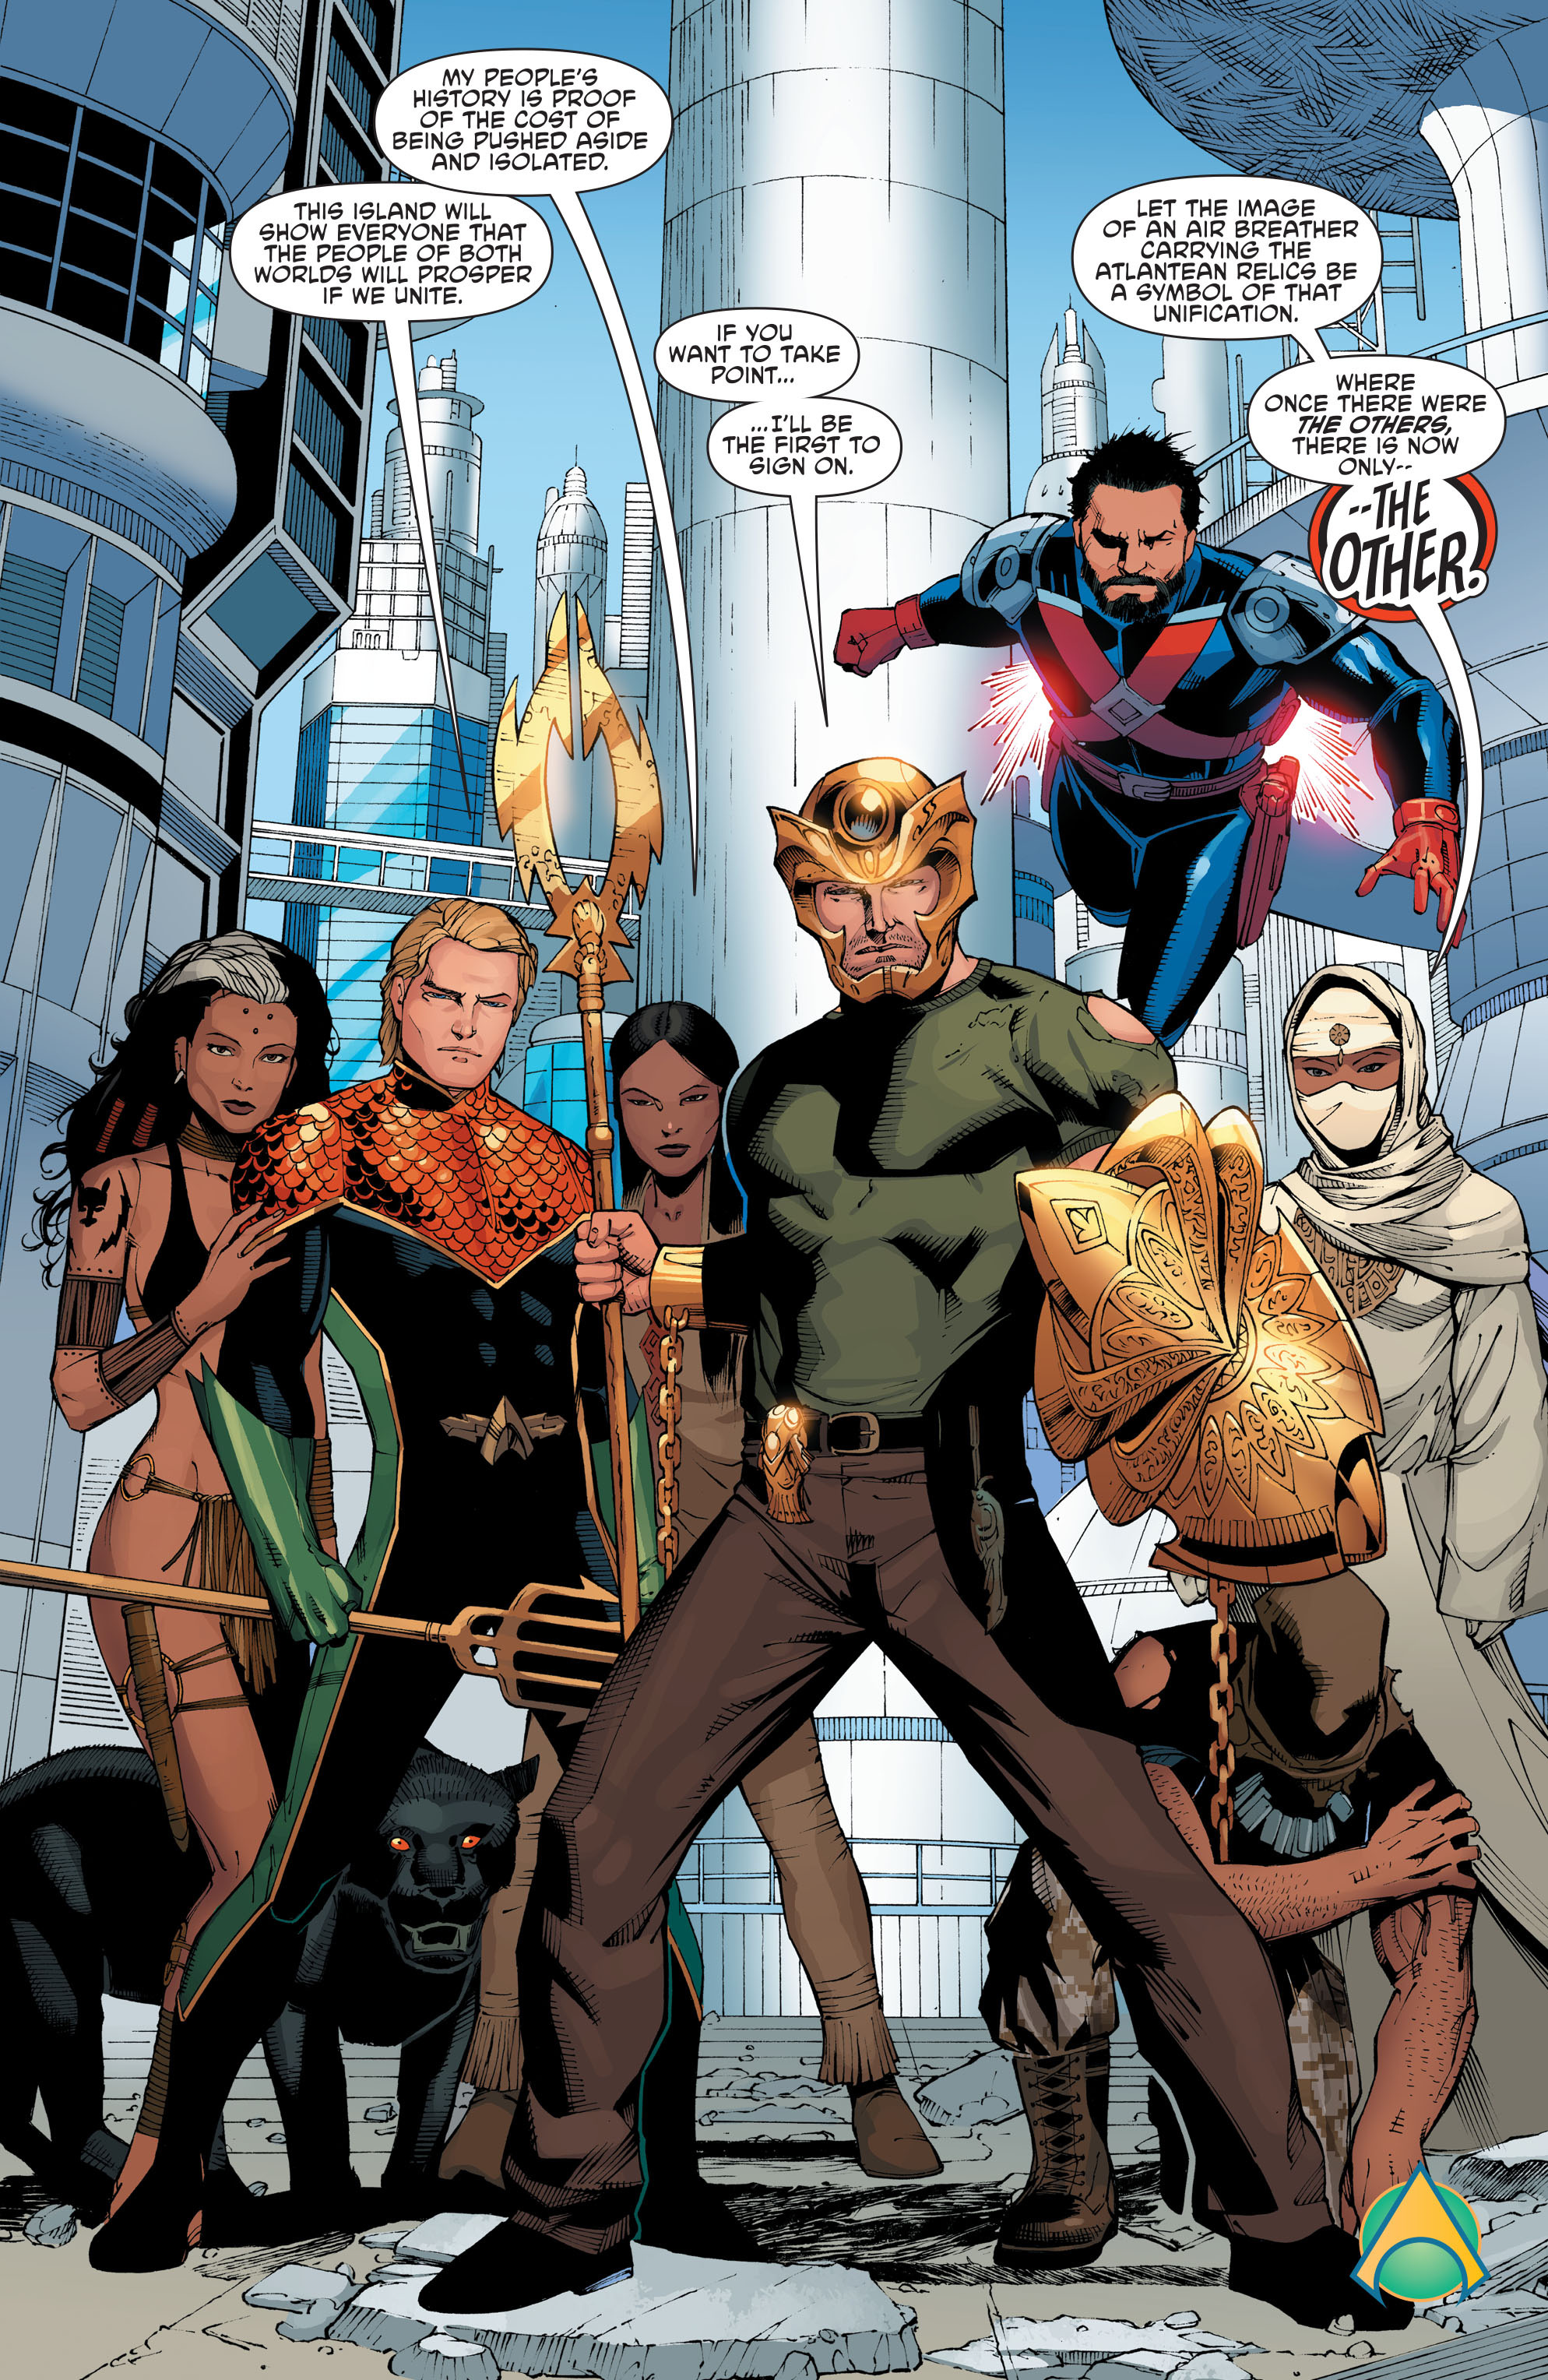 Aquaman And The Others #10